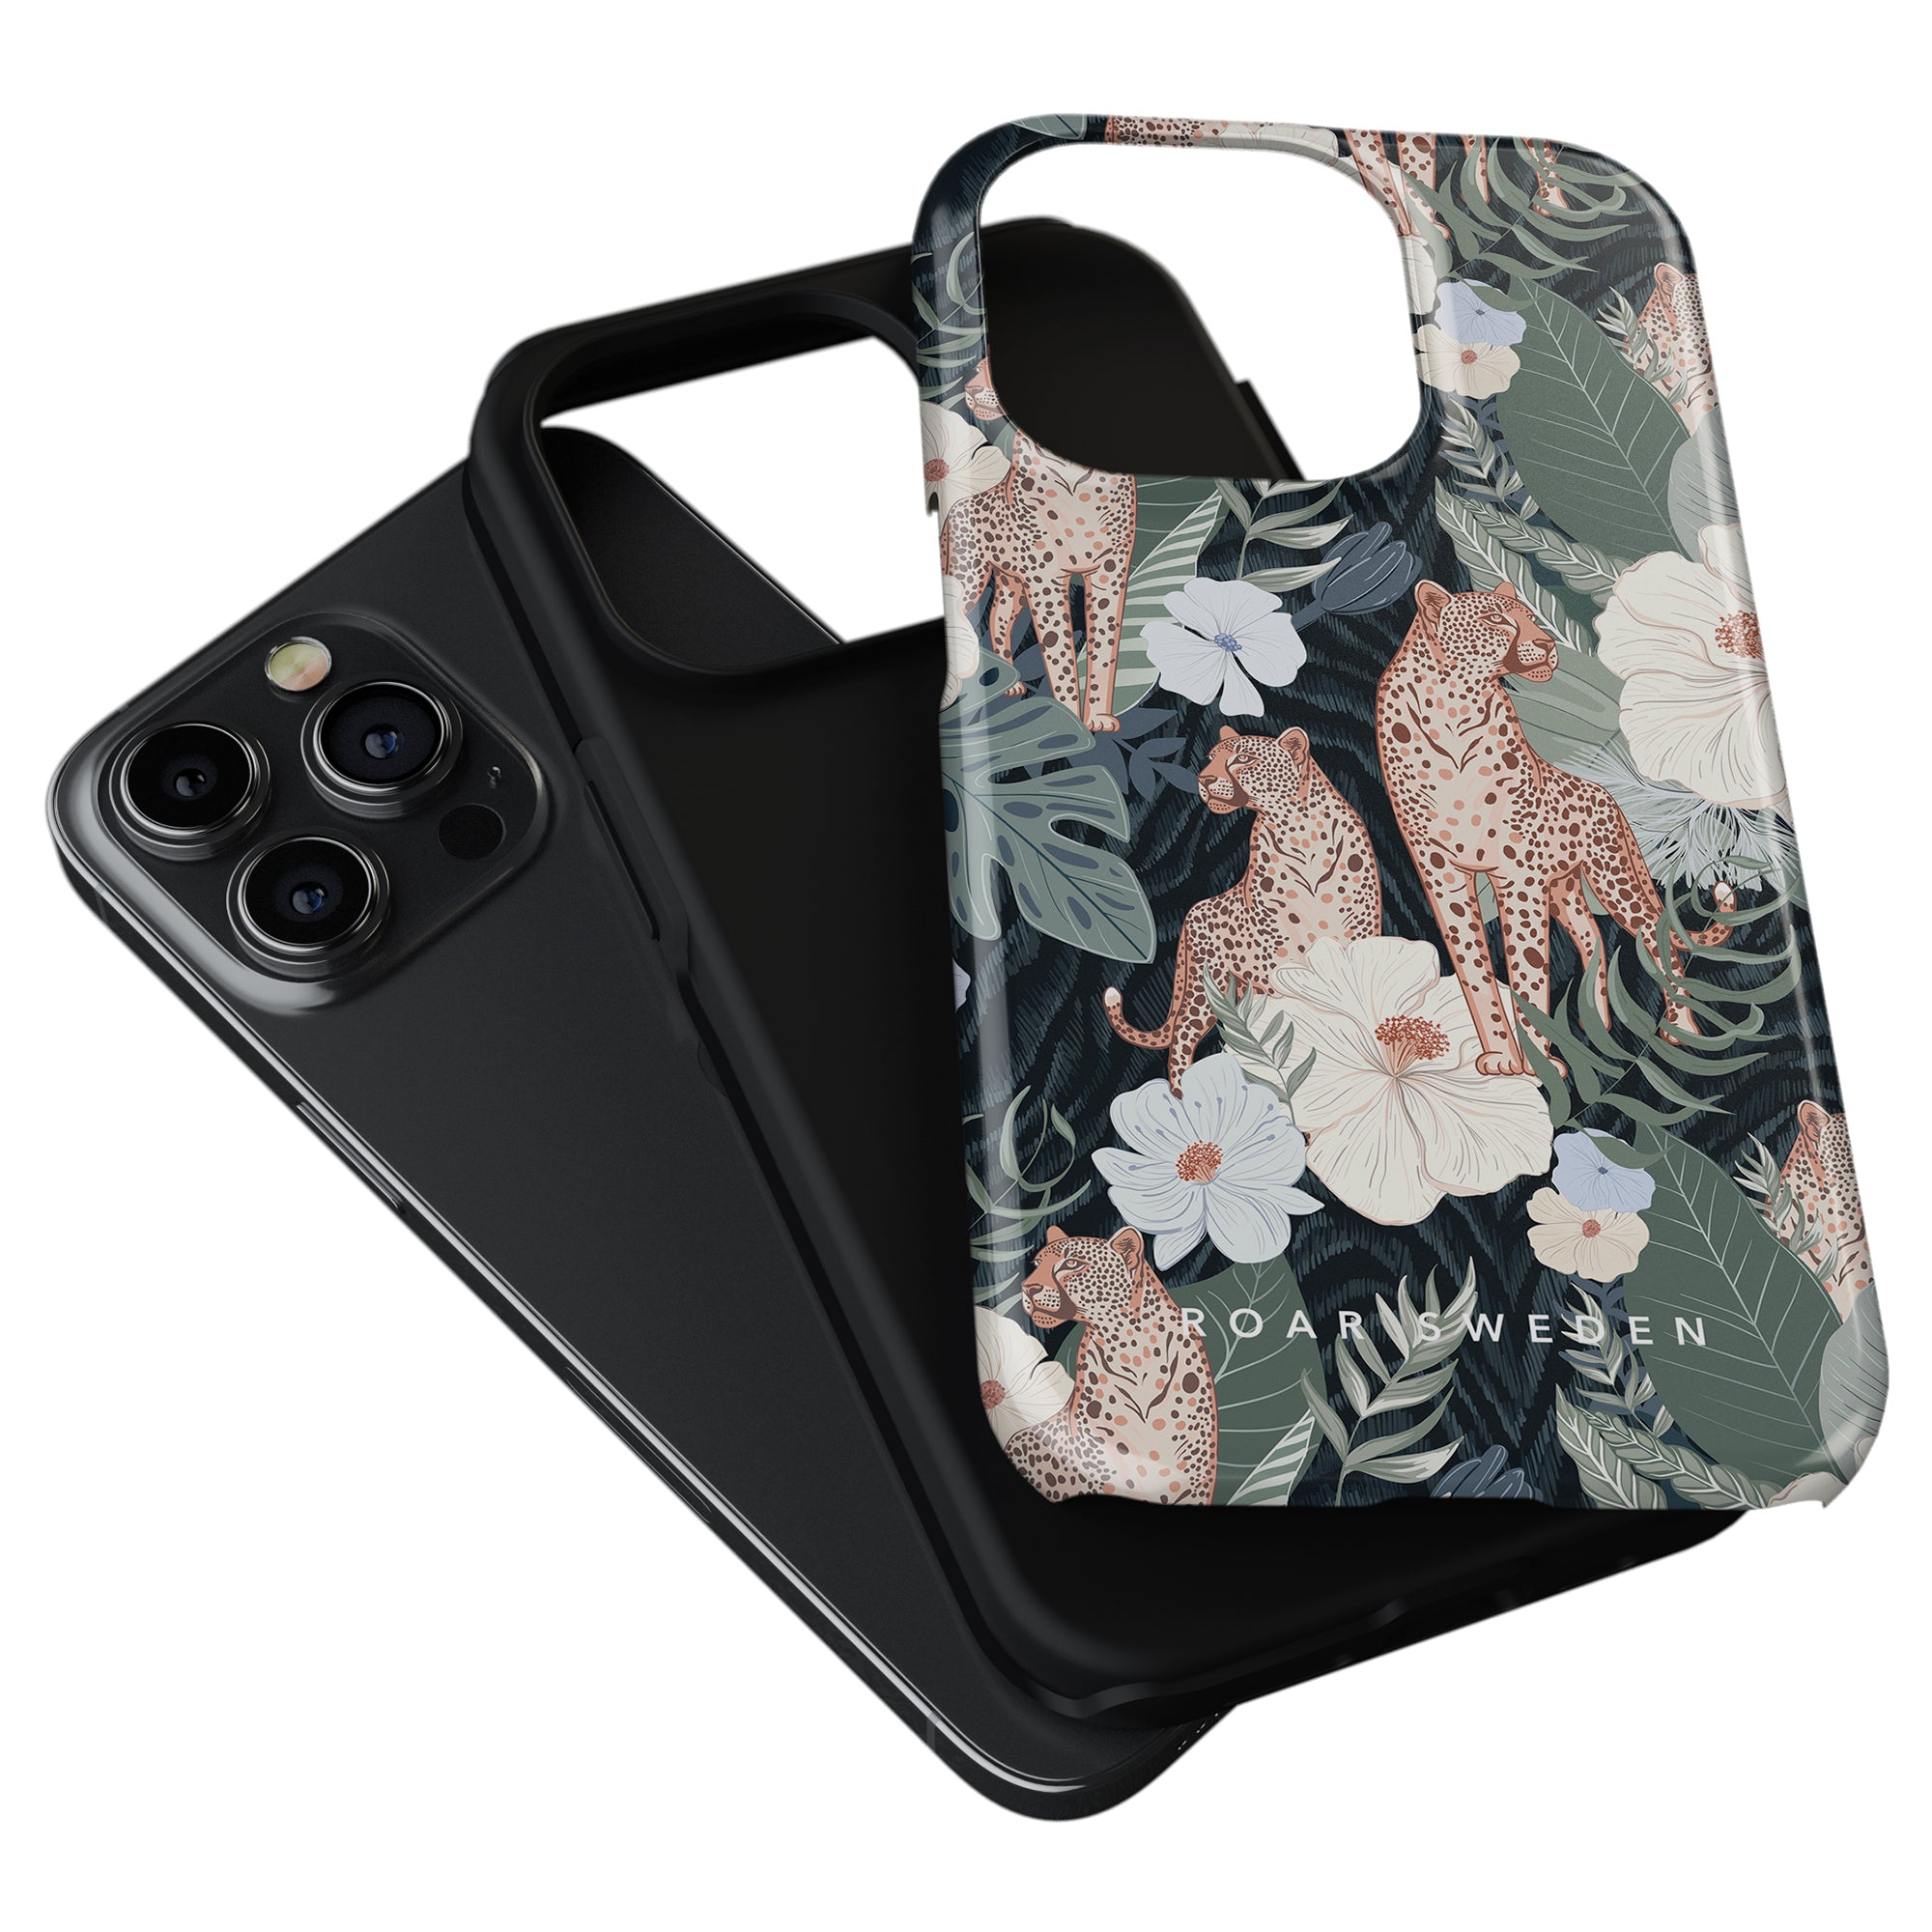 Two smartphone cases, one plain black and one with a floral design from the Leopardess Collection, positioned adjacent to each other as tough cases.